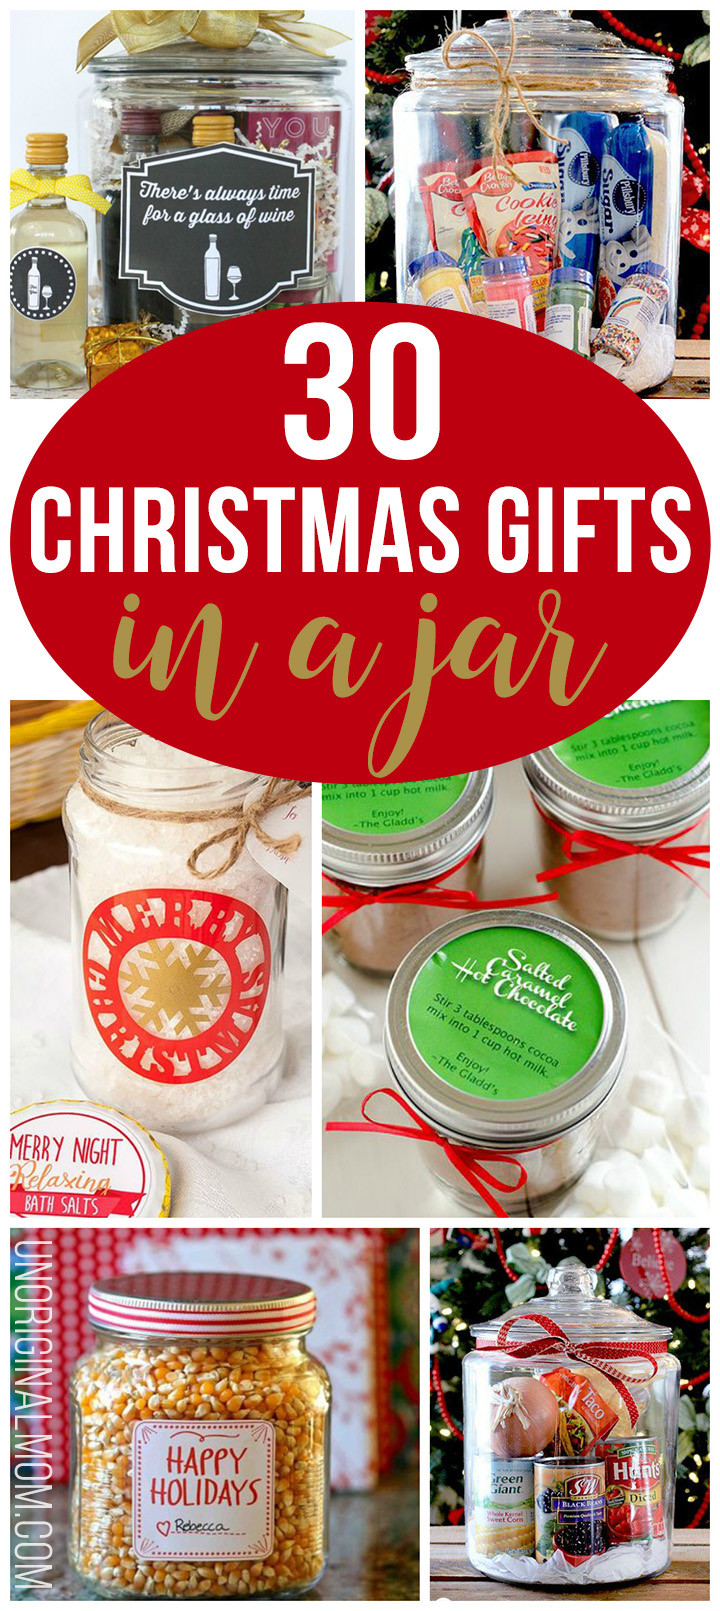 Holiday Gift Ideas
 30 Christmas Gifts in a Jar unOriginal Mom